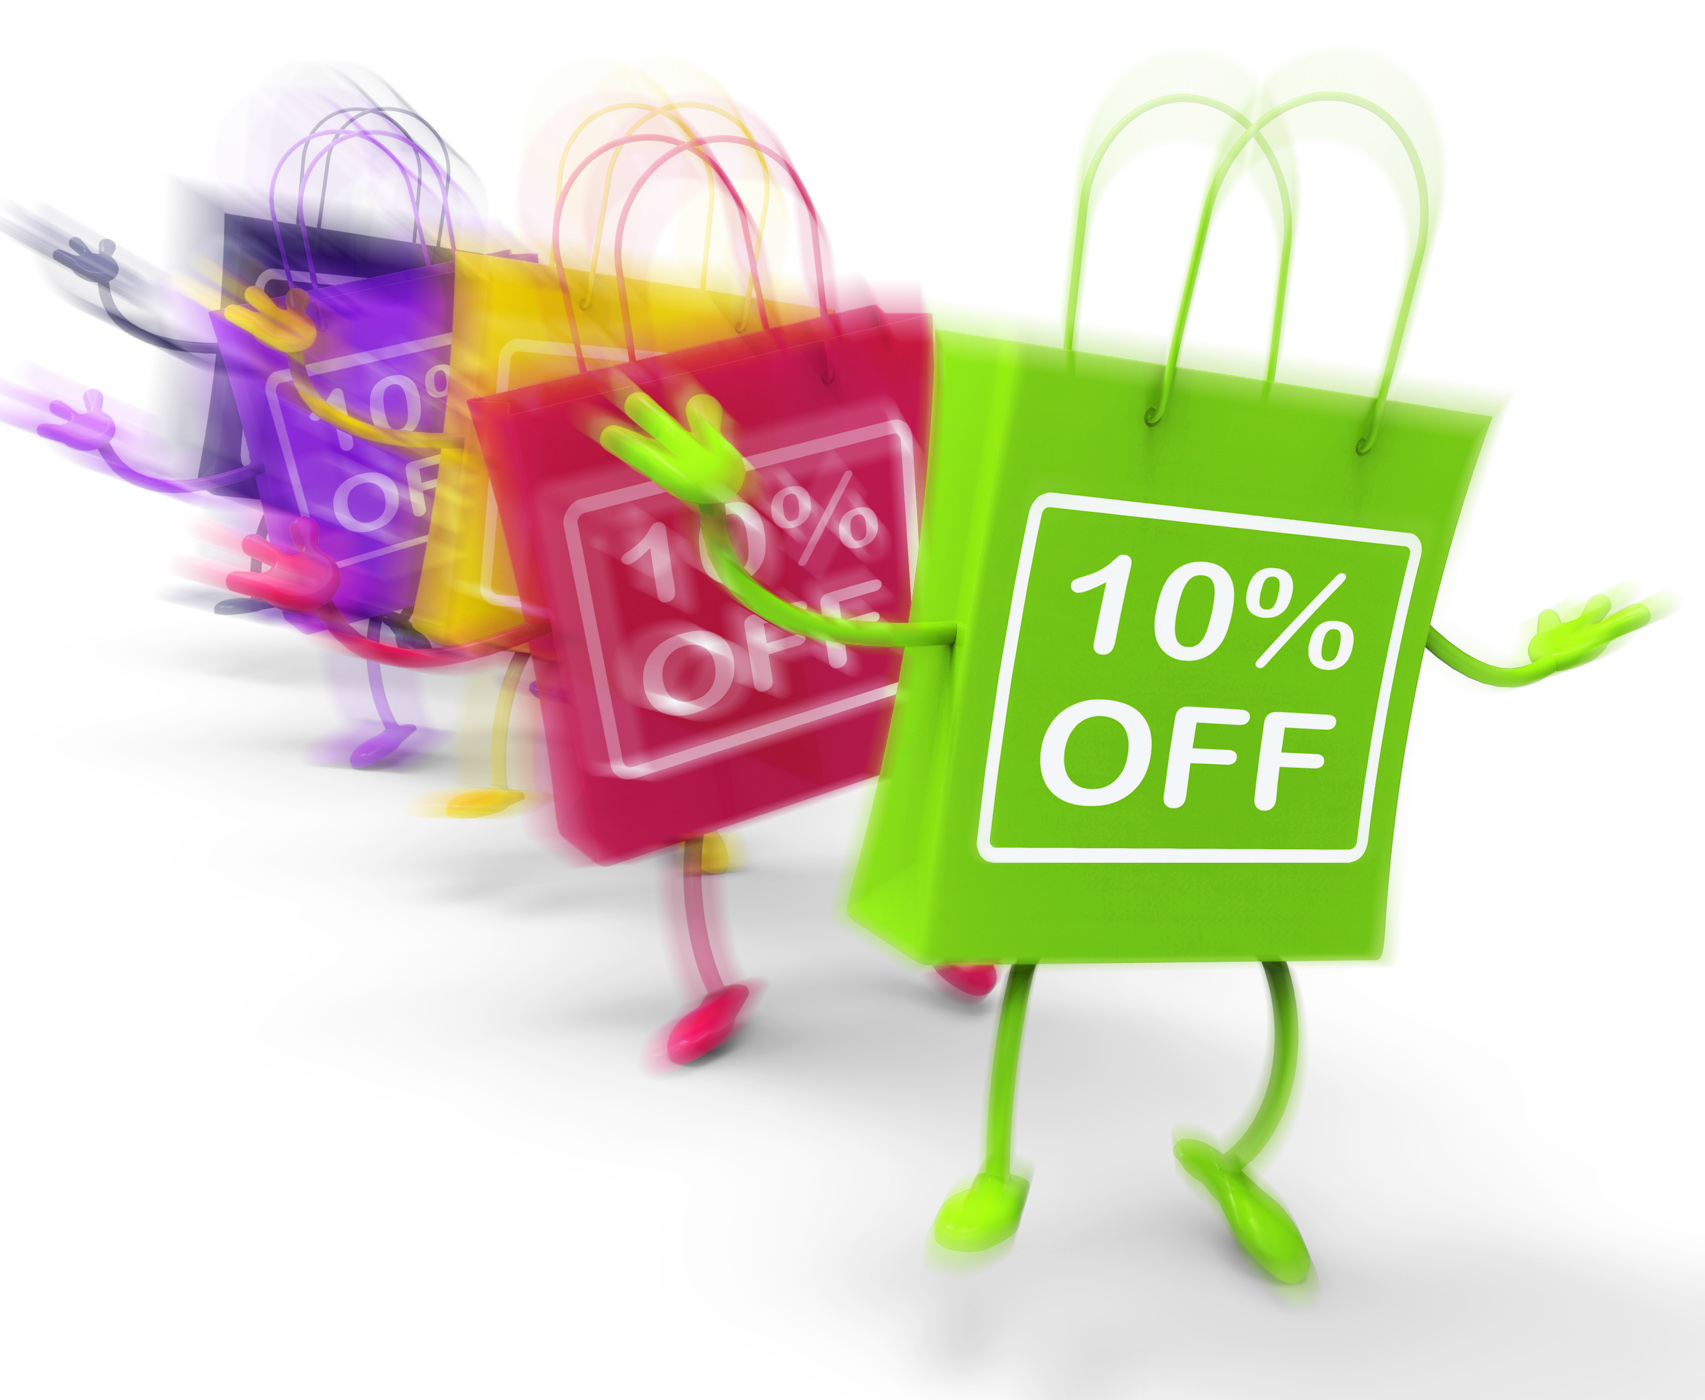 Ten Percent Off On Colored Bags Show Bargains, 10off, Promo, Sign, Savings, HQ Photo